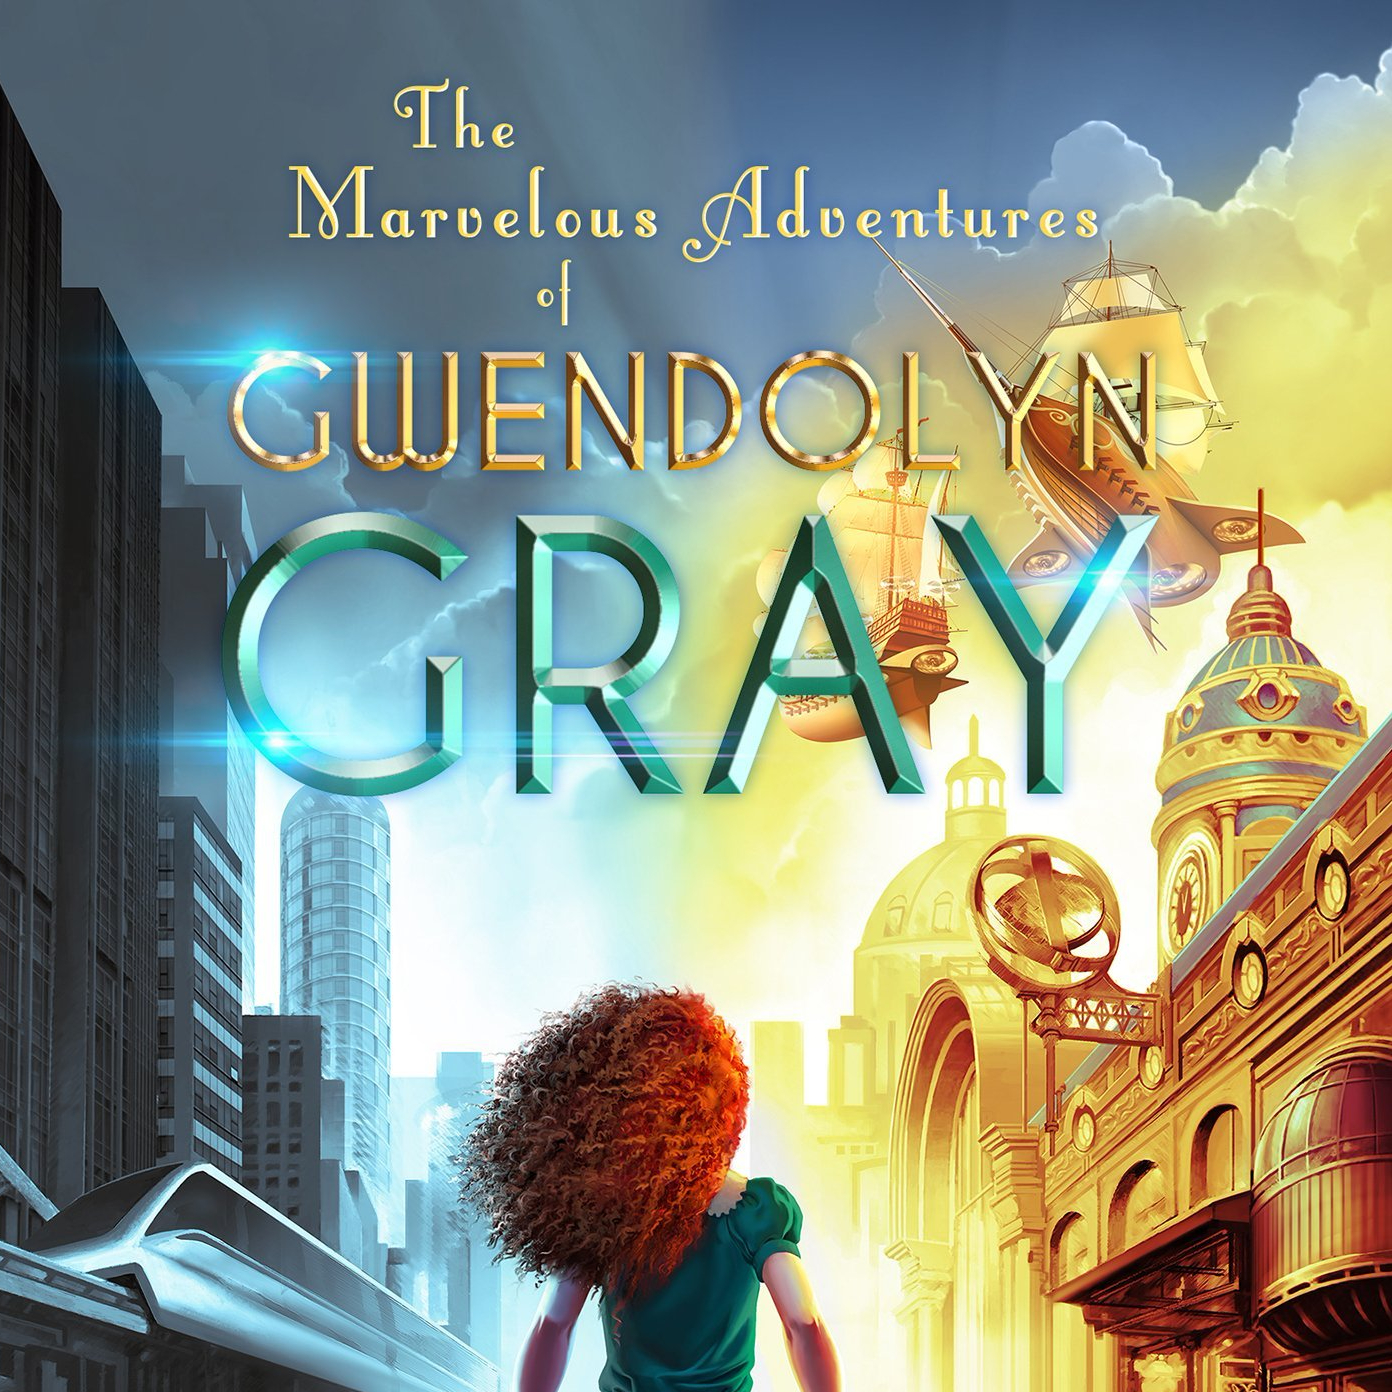 The Marvelous Adventures of Gwendolyn Gray by B.A. Williamson